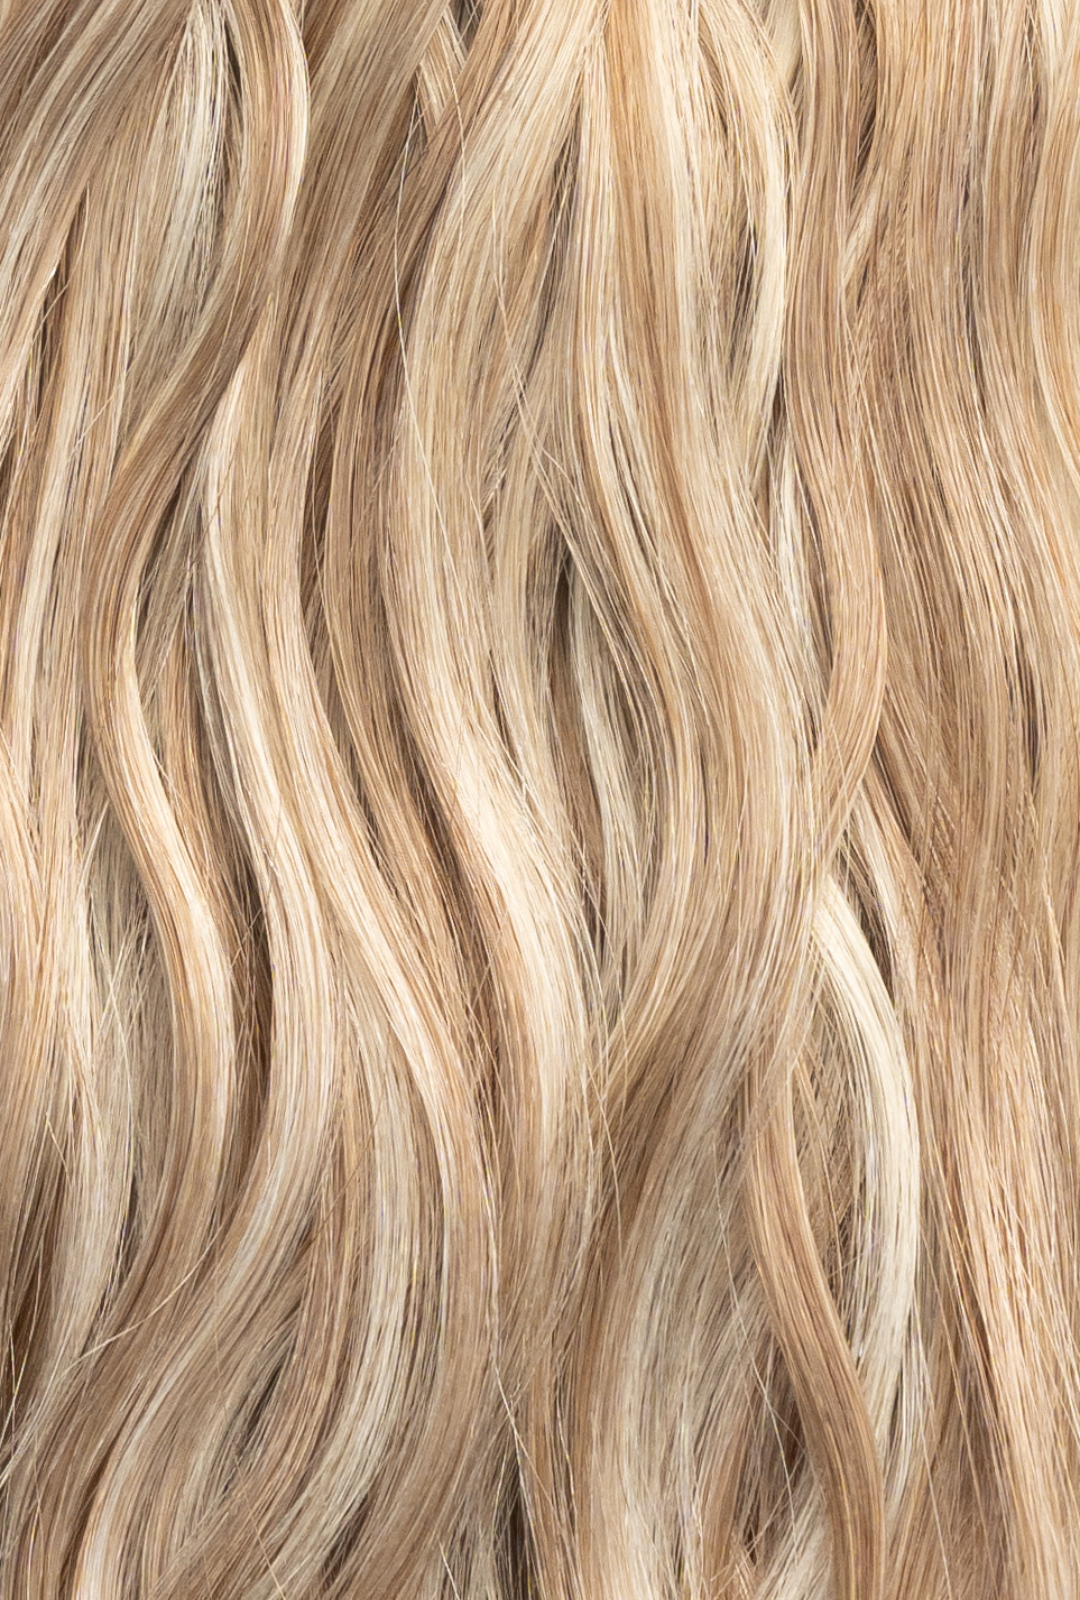 Waved by Laced Hair Hand Tied Weft Extensions Dimensional #8/60